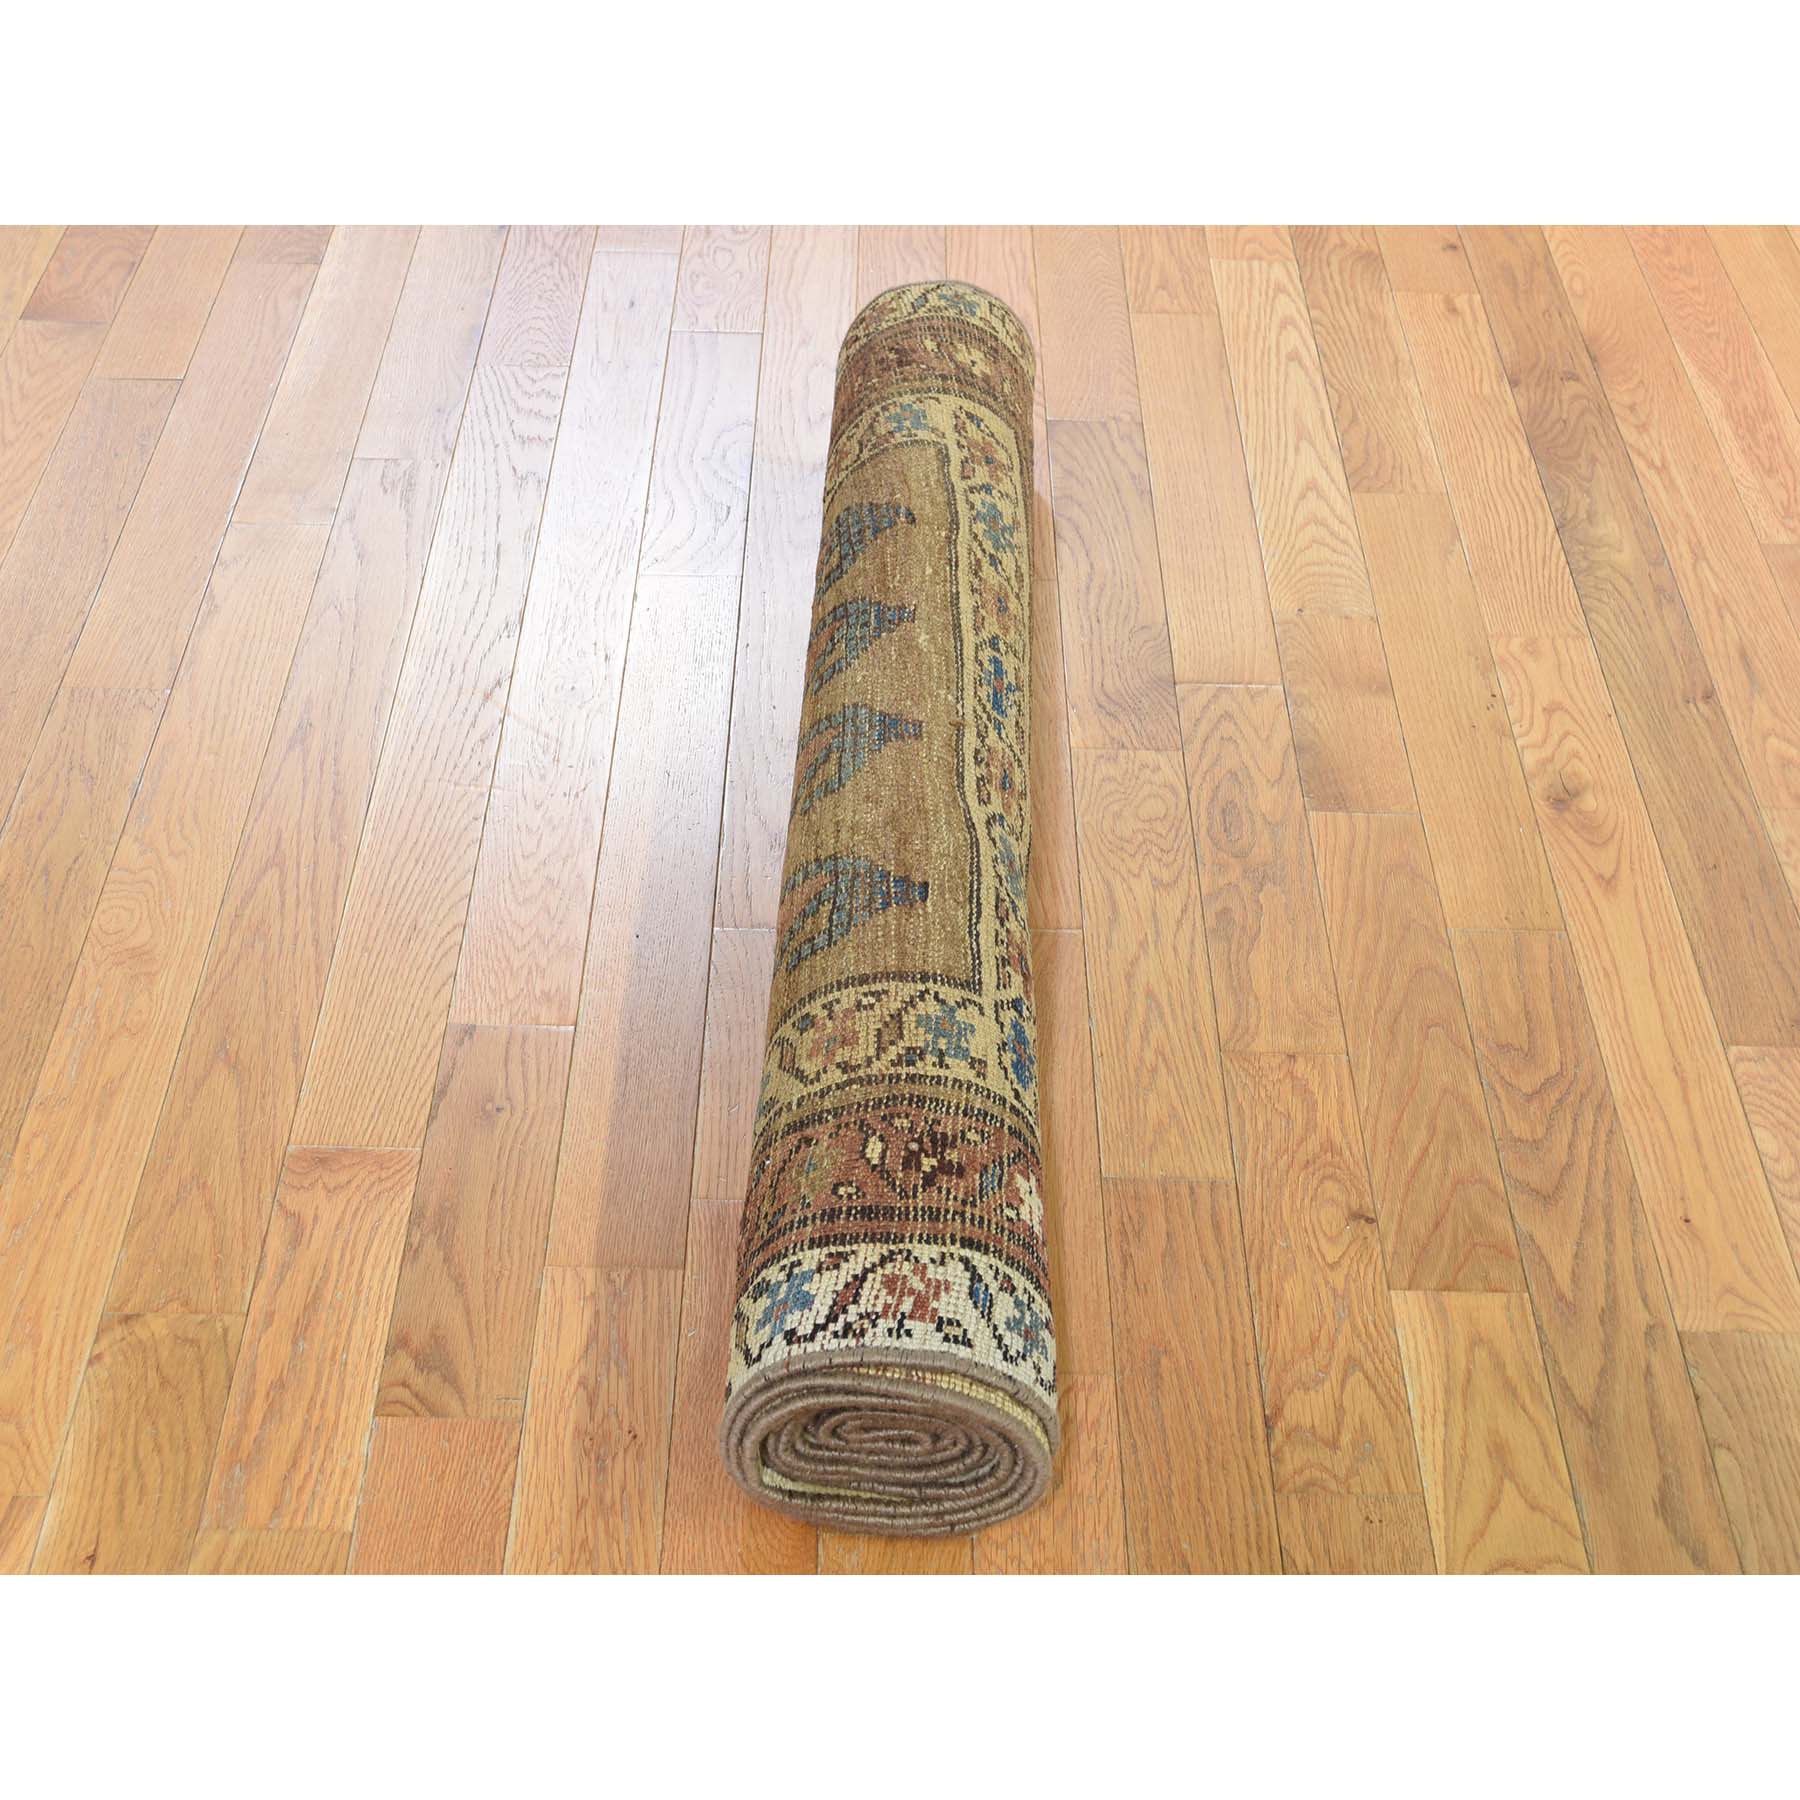 3'9"x10'7" Antique Persian North West Boteh Design Camel Hair Wide Runner Hand Woven Oriental Rug 